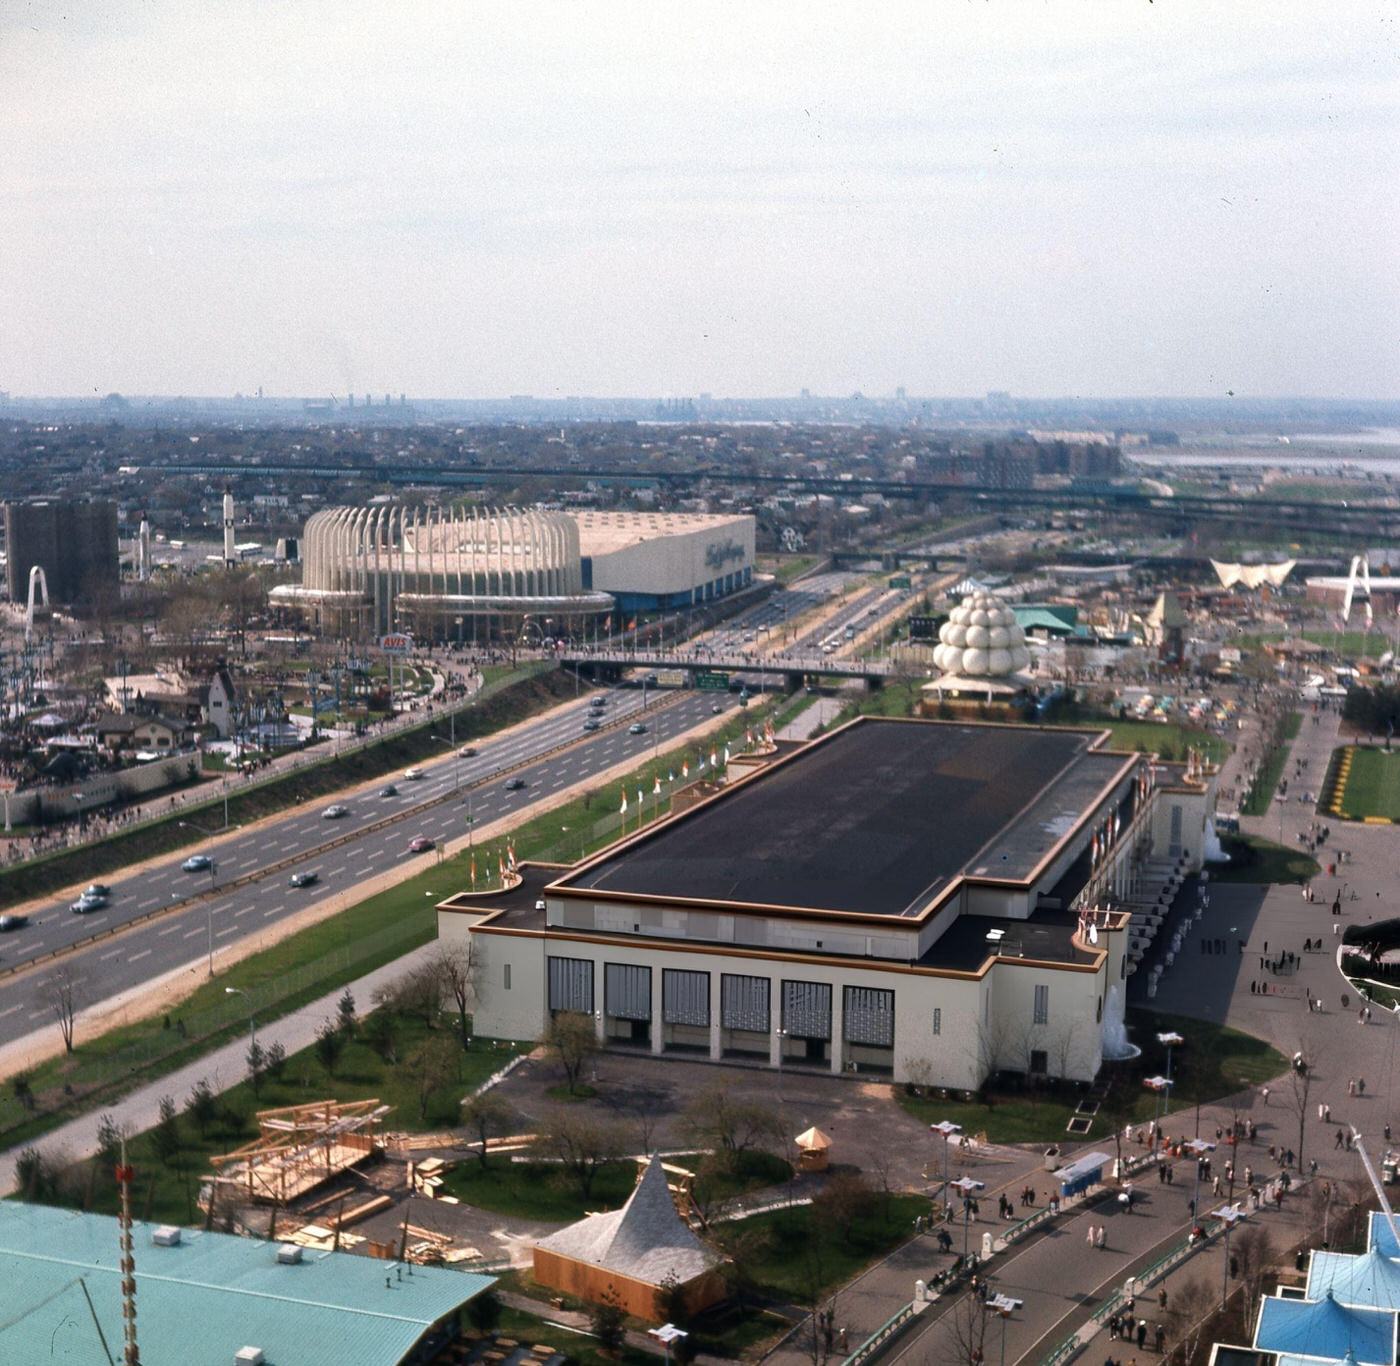 Panoramic Aerial View Of The 1964 New York World'S Fairgrounds Toward Laguardia Airport On Flushing Bay In Corona, Queens, 1964.